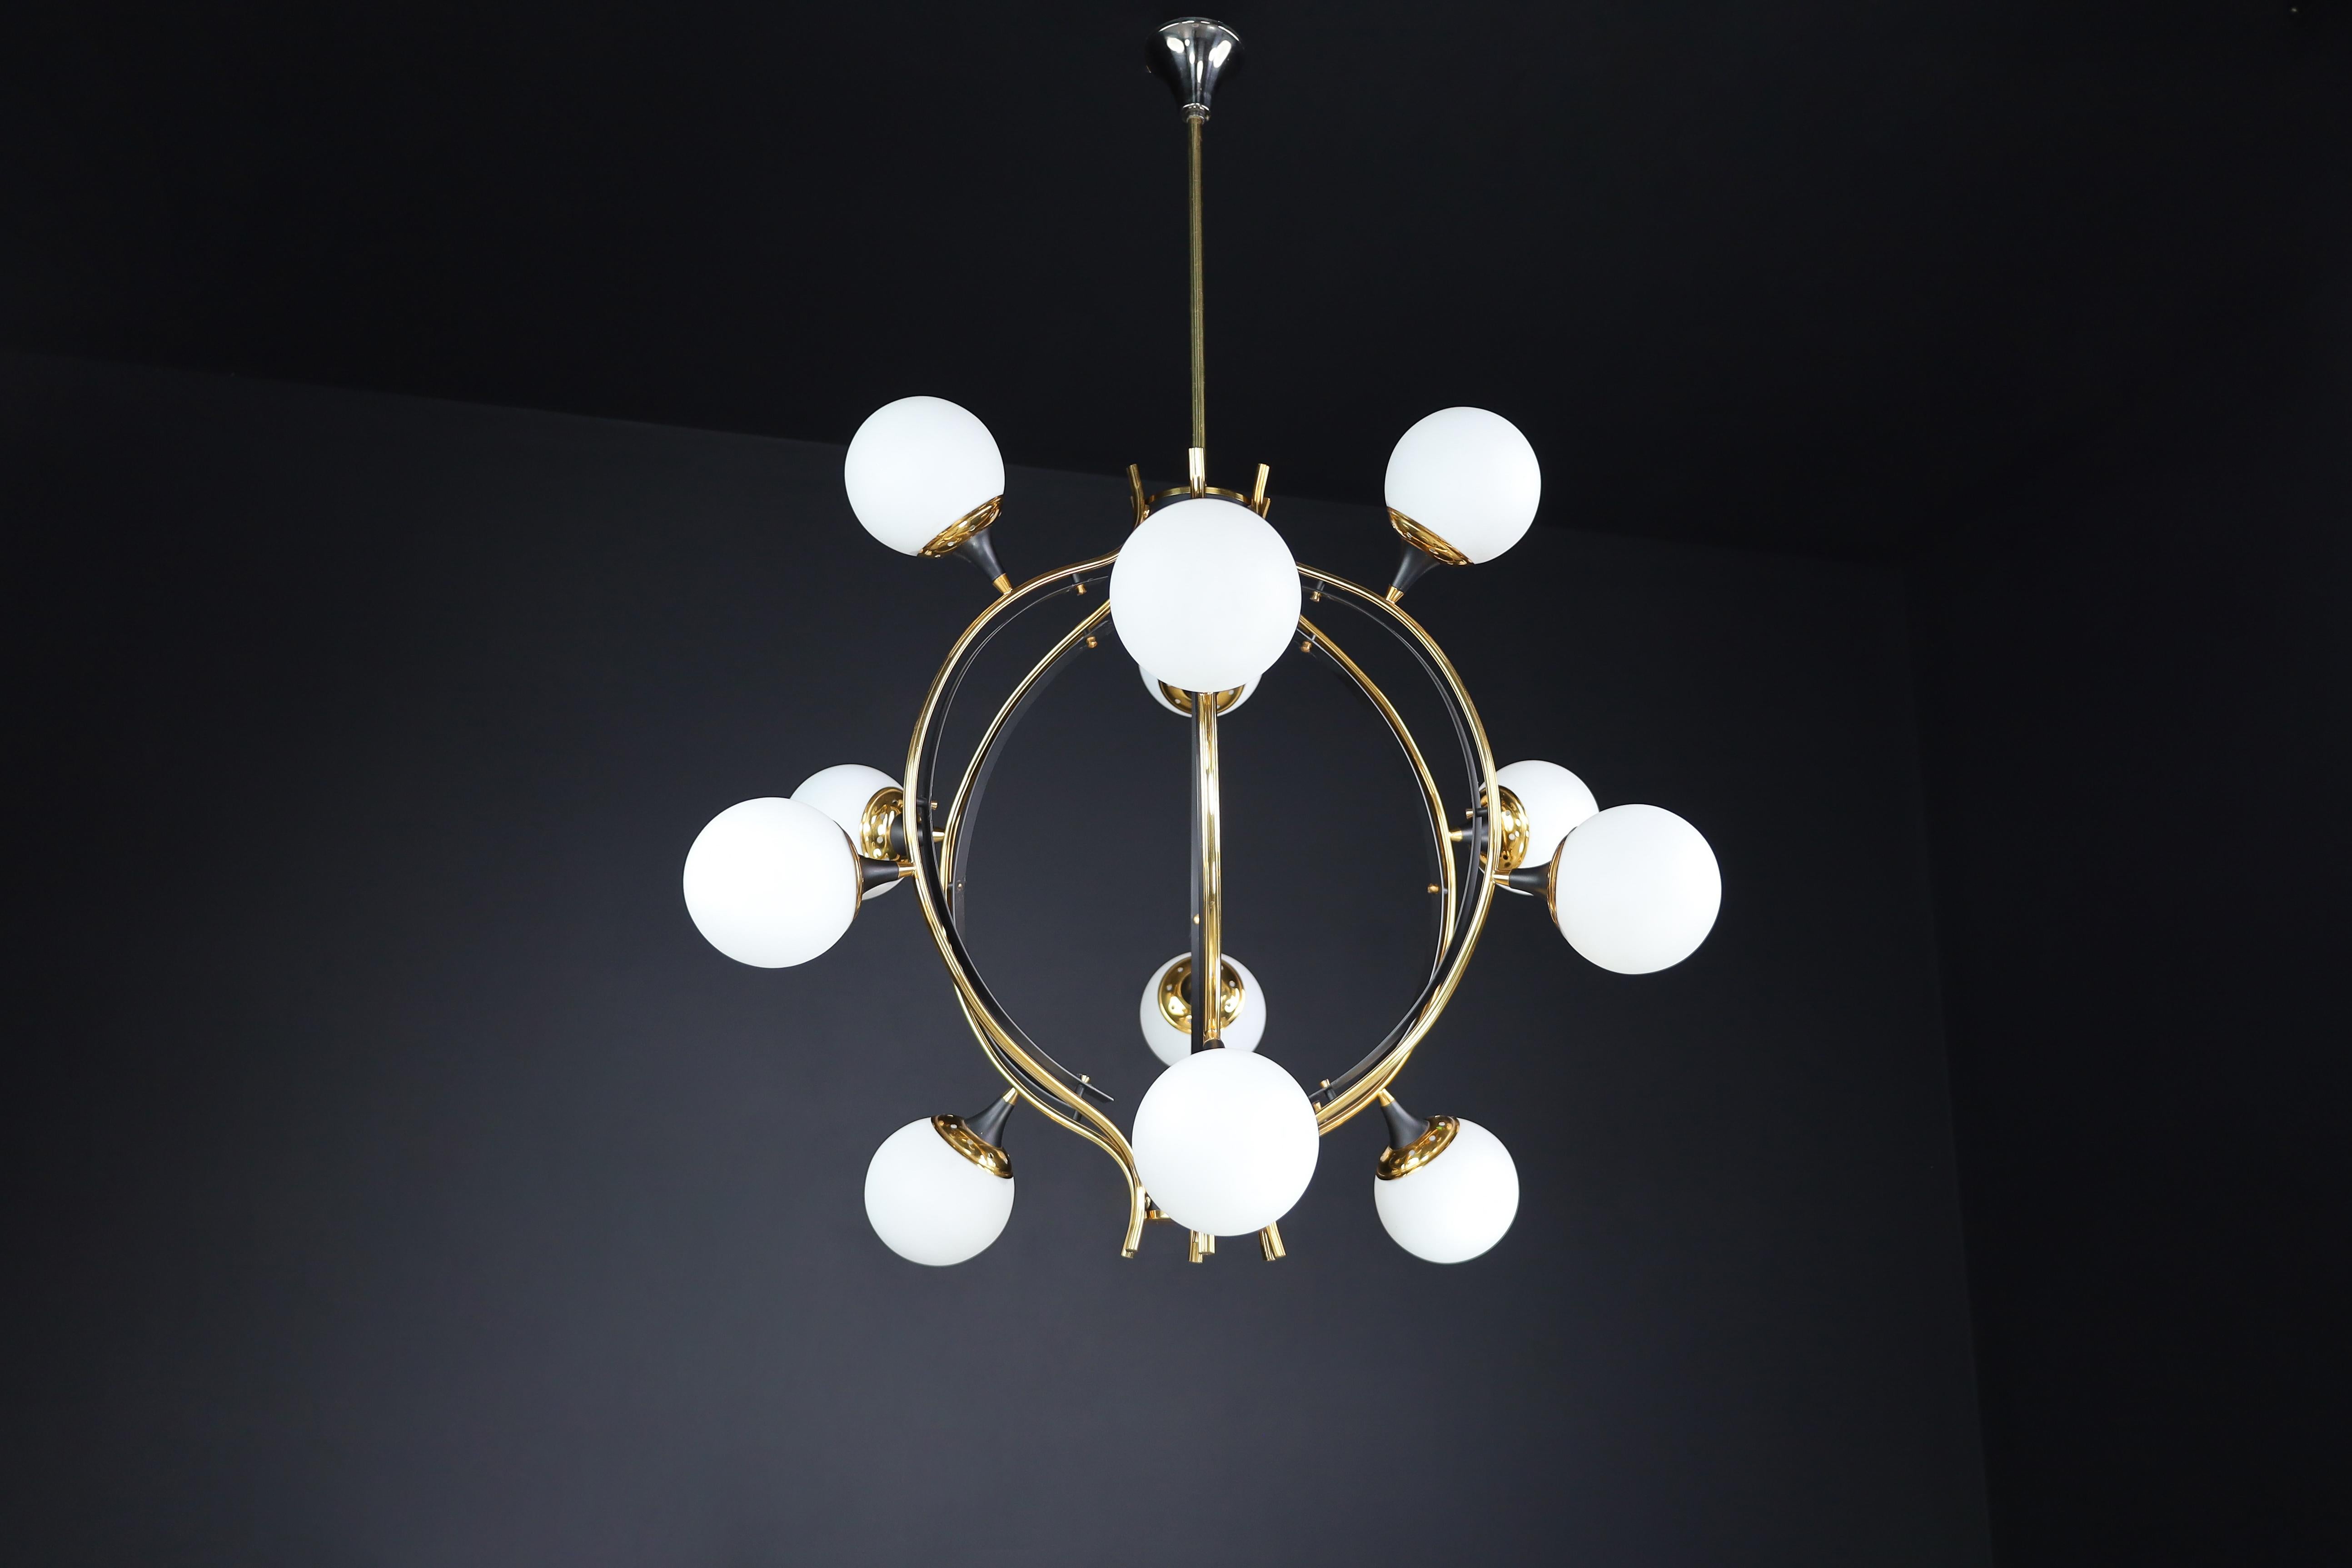 20th Century Midcentury Stilnovo Chandelier in Brass and 12 Opaline Globes, Italy 1950s For Sale